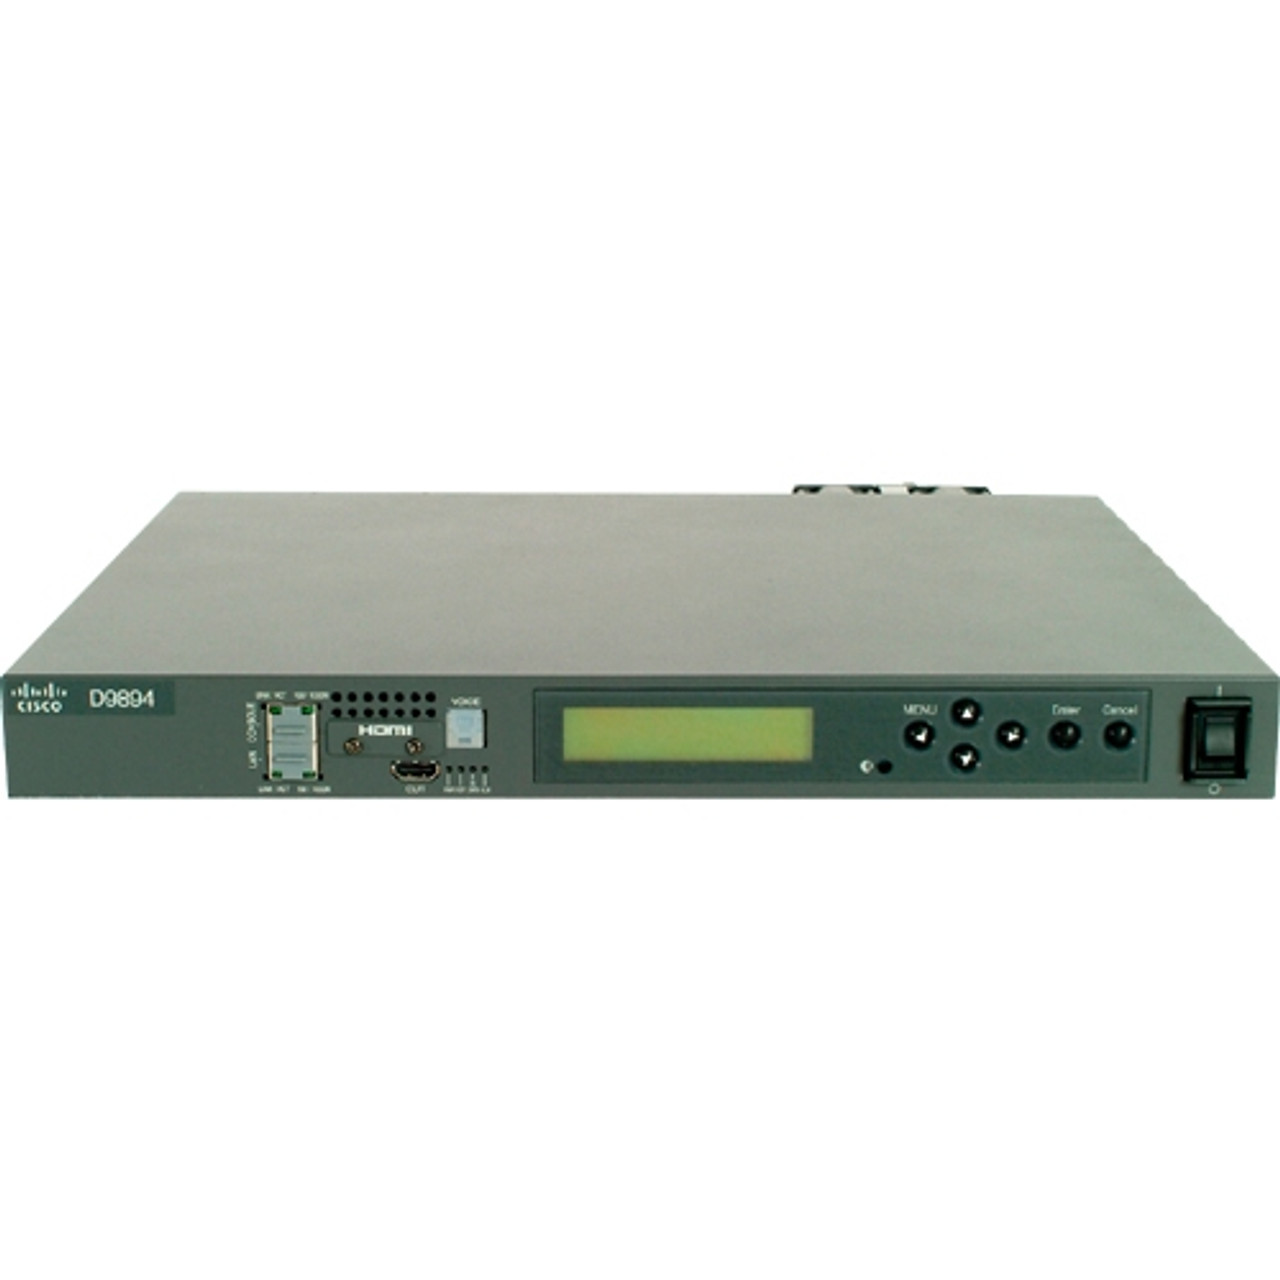 40297680 Cisco D9894 Video Decoder Functions: Video Decoding, Video Encoding, TV Tuning, Digital TV Receiver, Video Capturing, HDTV Tuning, Video Compression